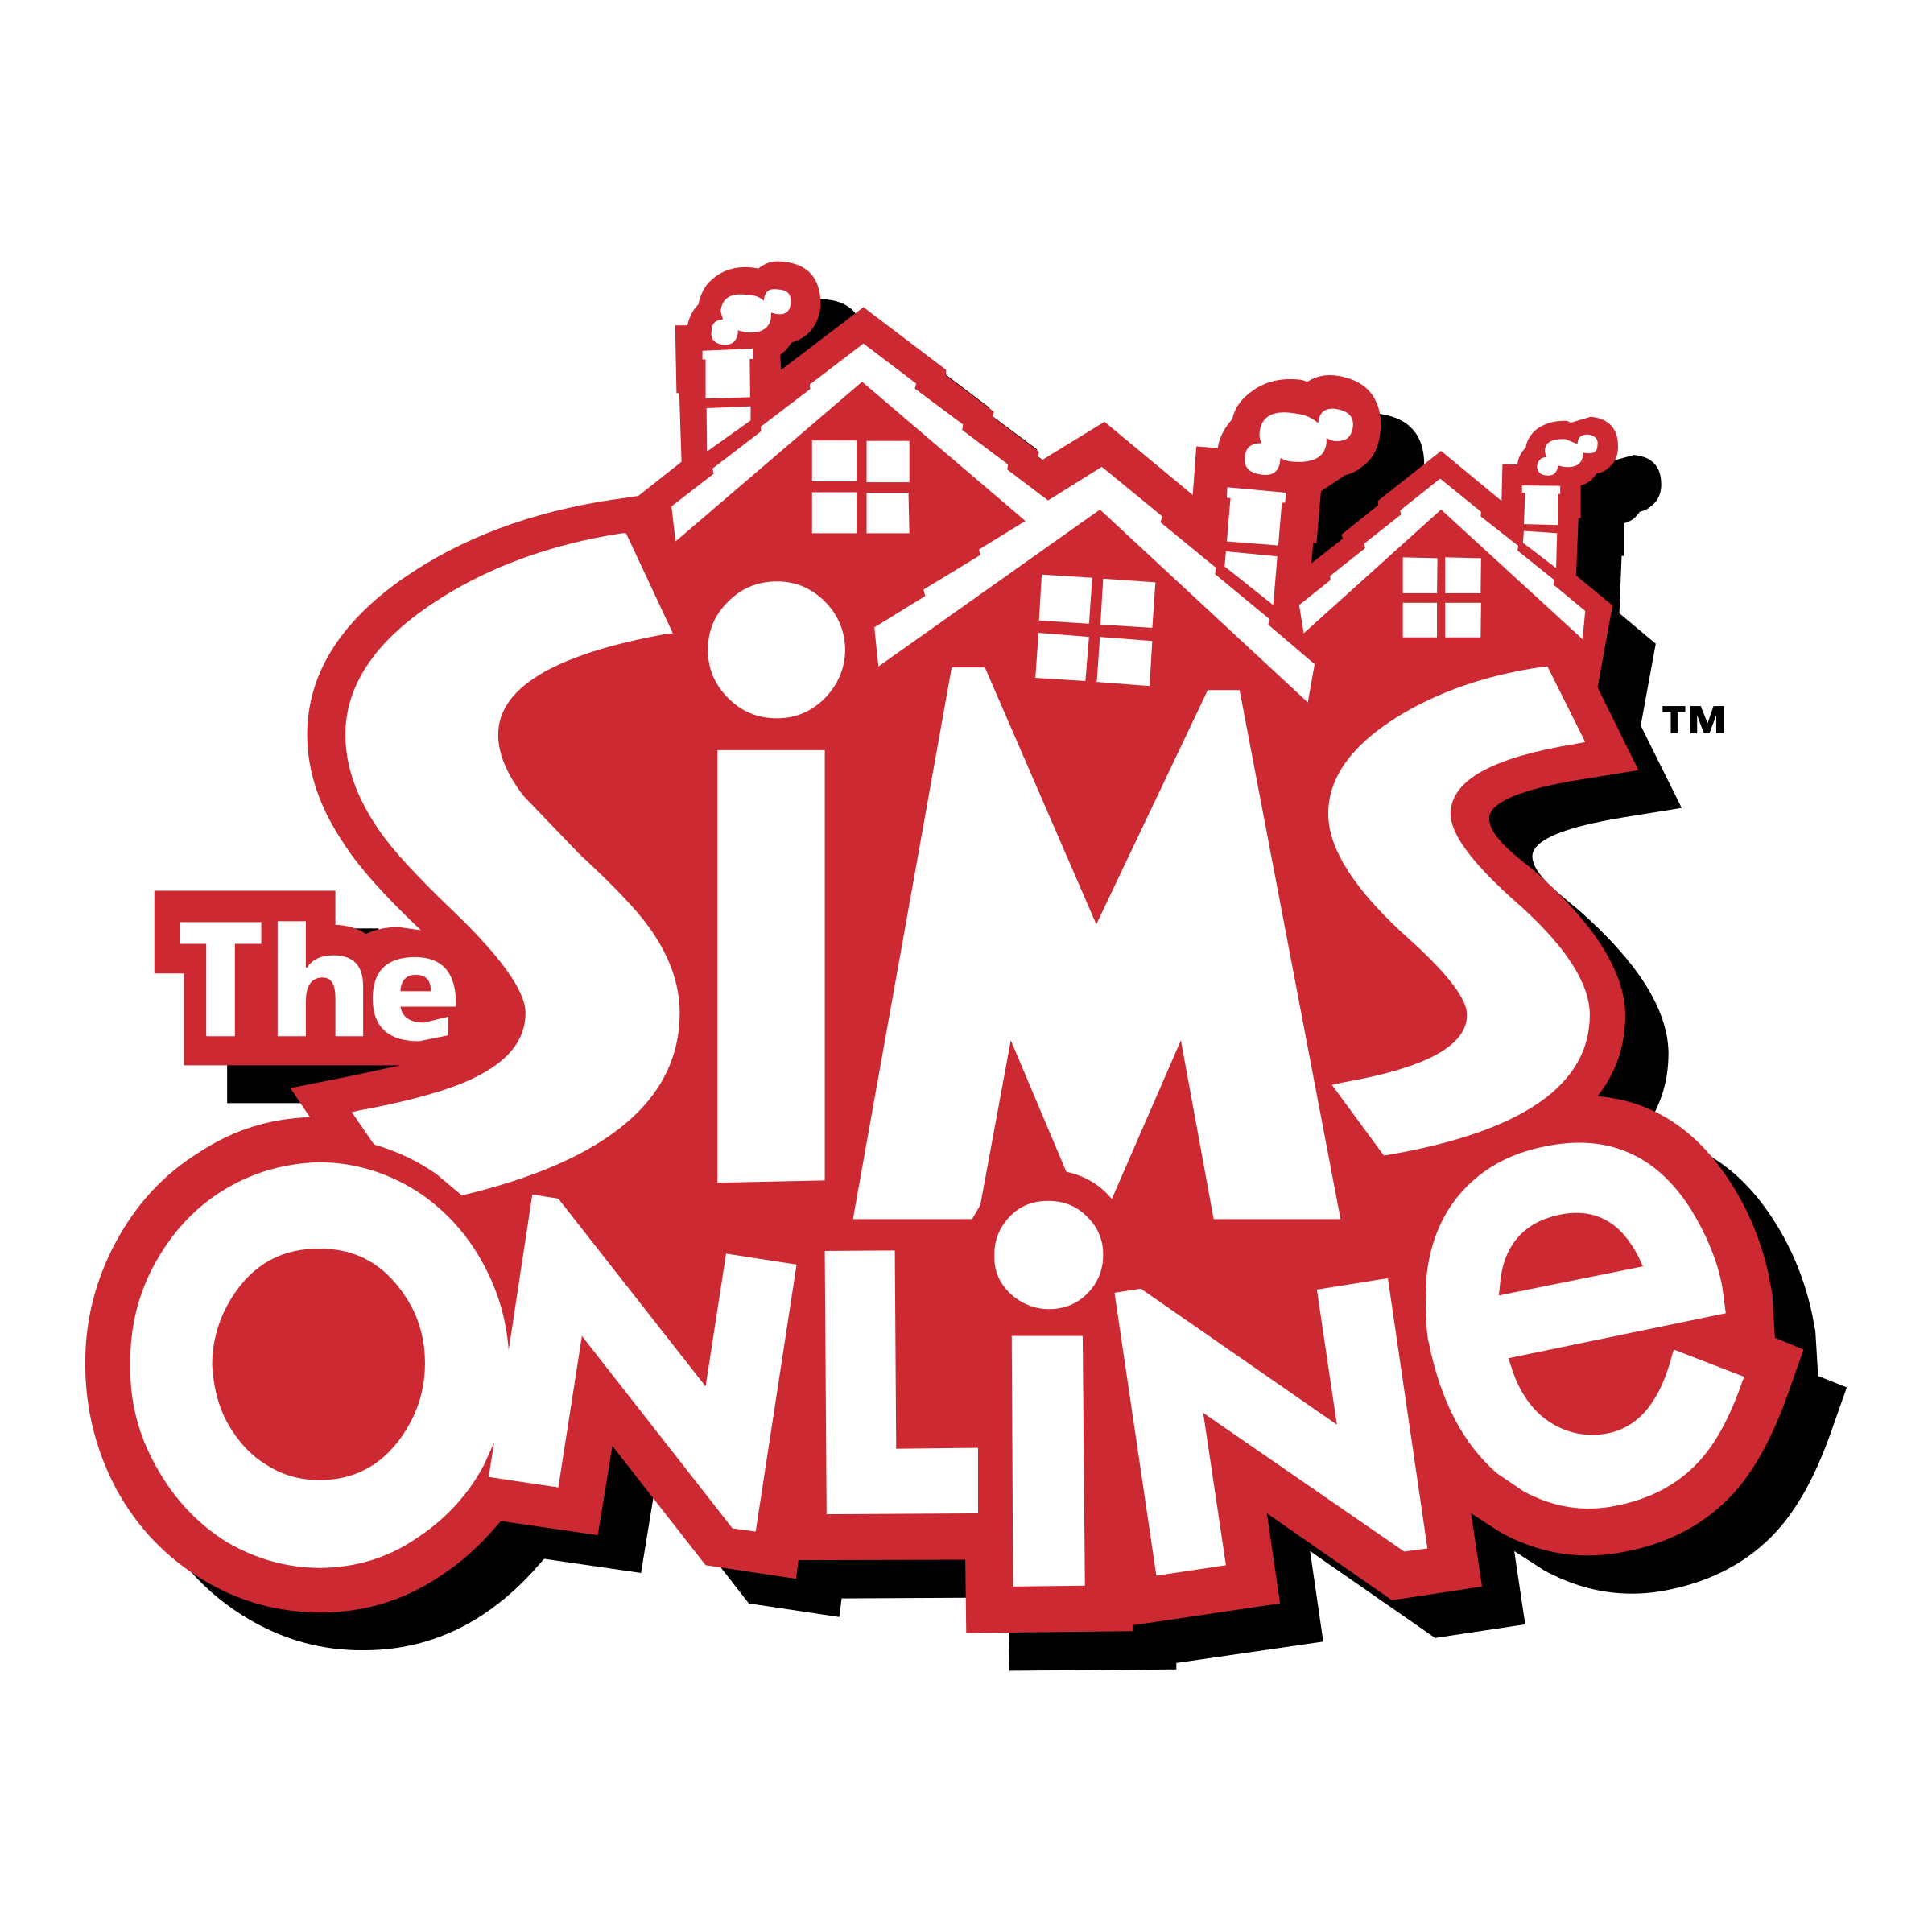 Png to vector online. The sims logo transparent